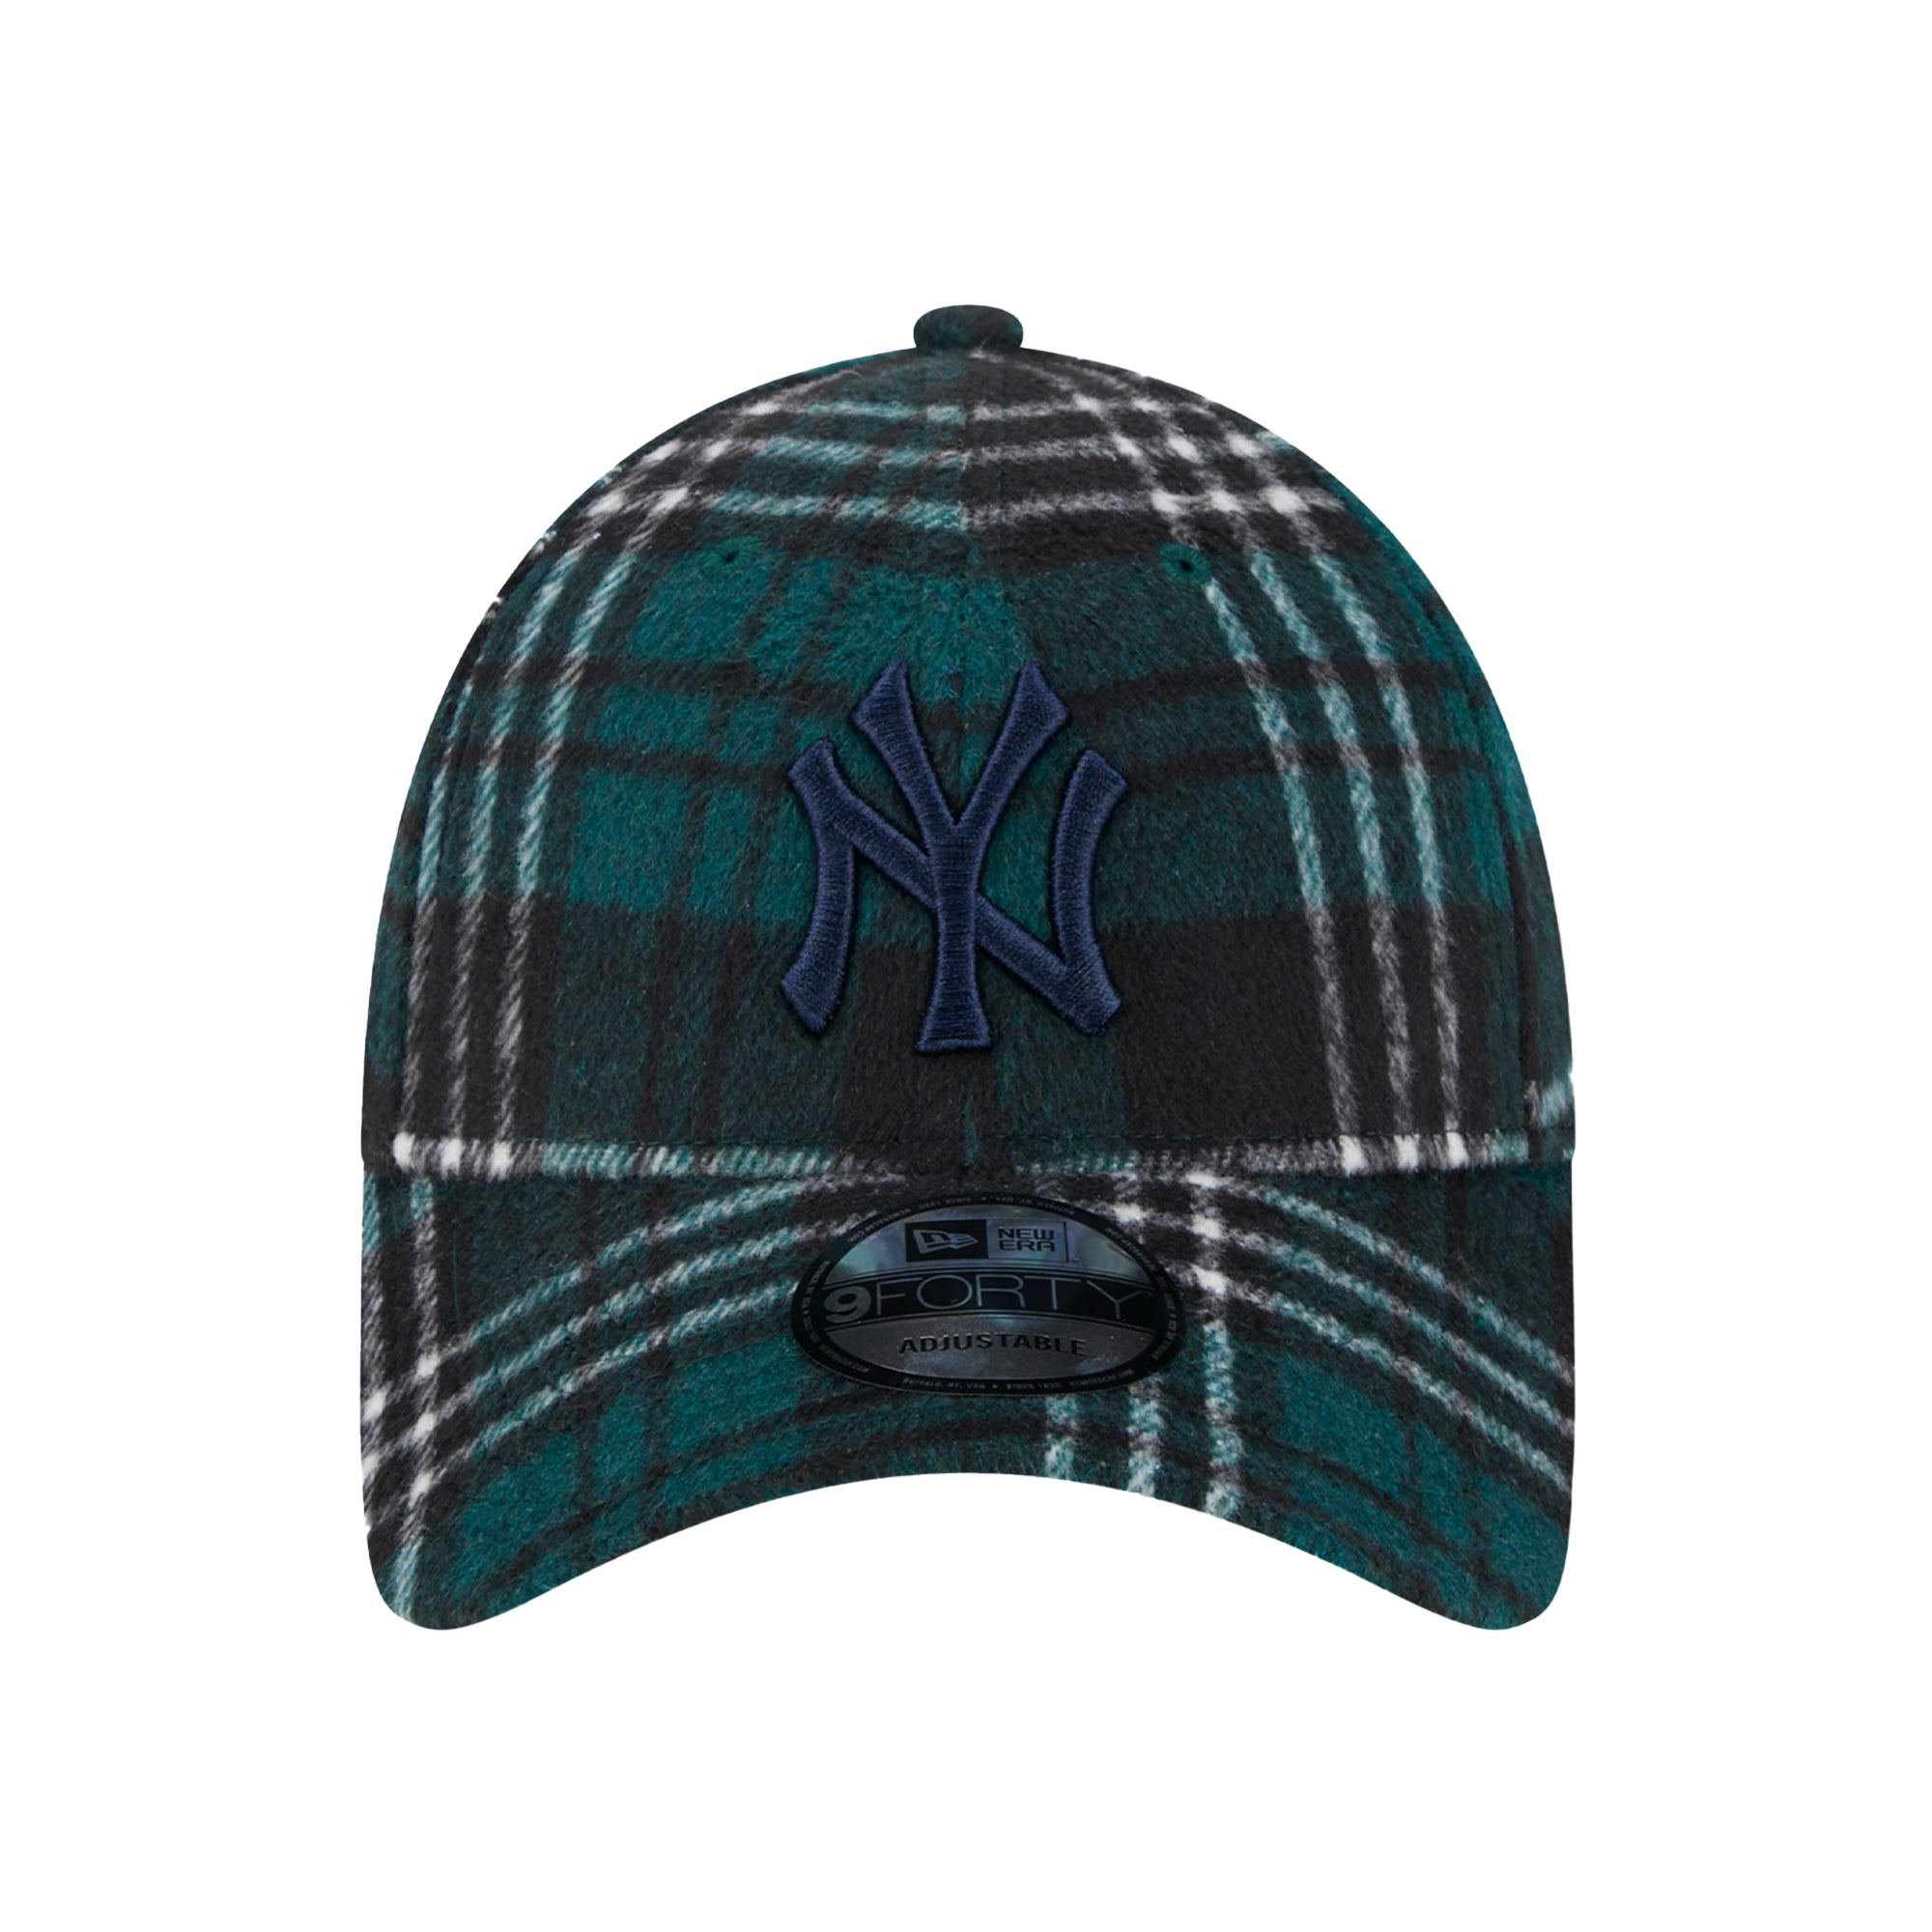 New York Yankees Check Green 9FORTY Adjustable